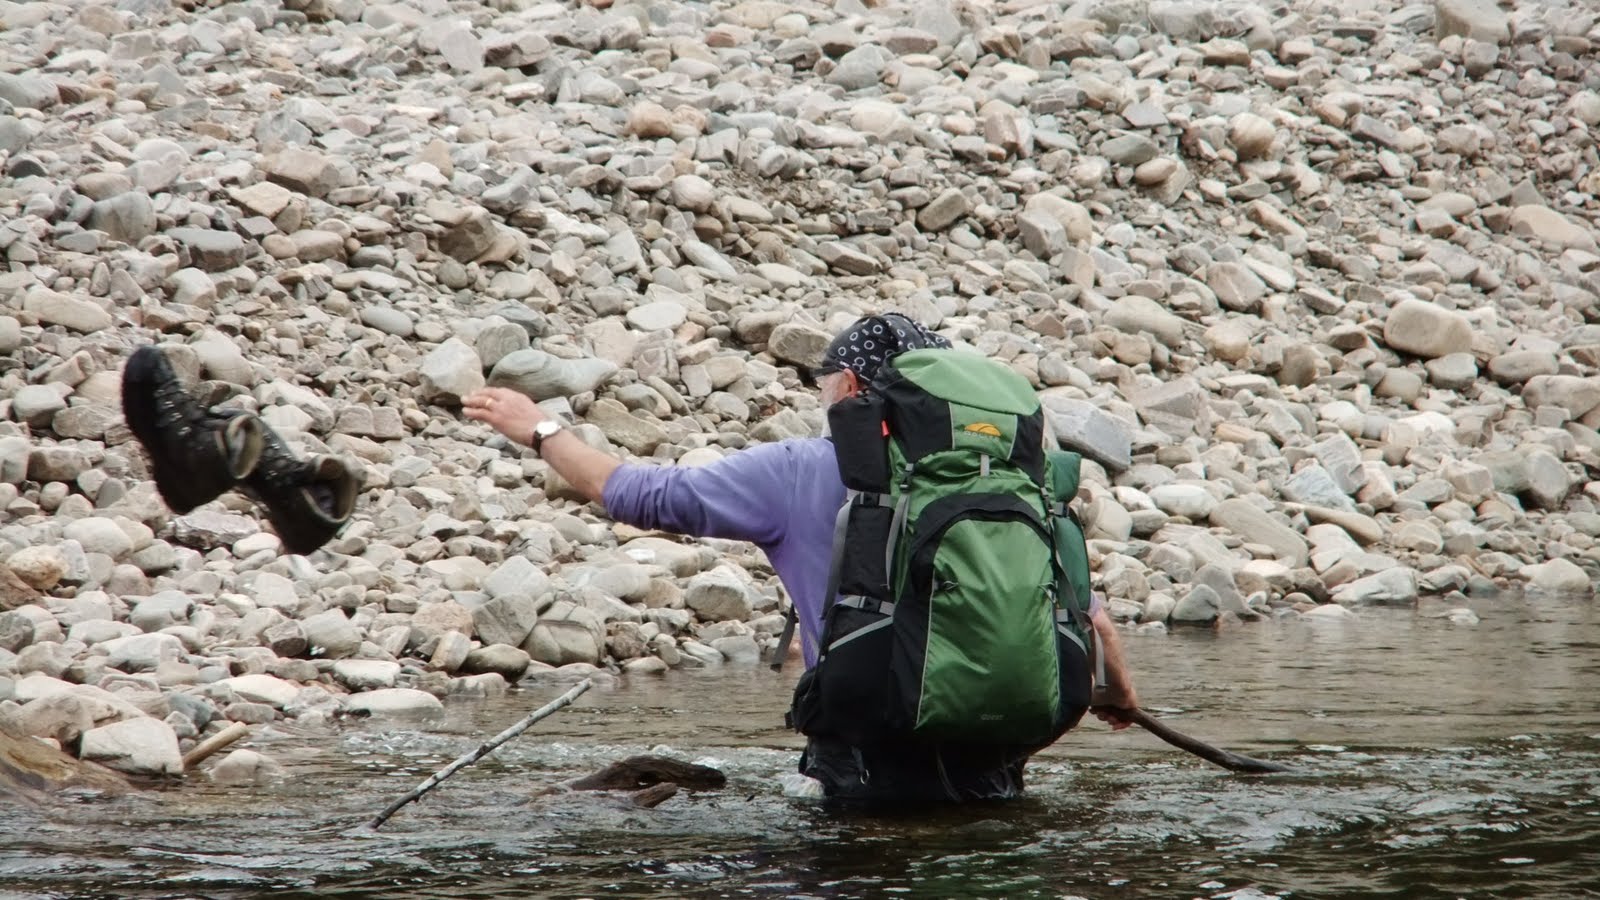 a man wades through a stream with a backpack on and a bird flying towards him